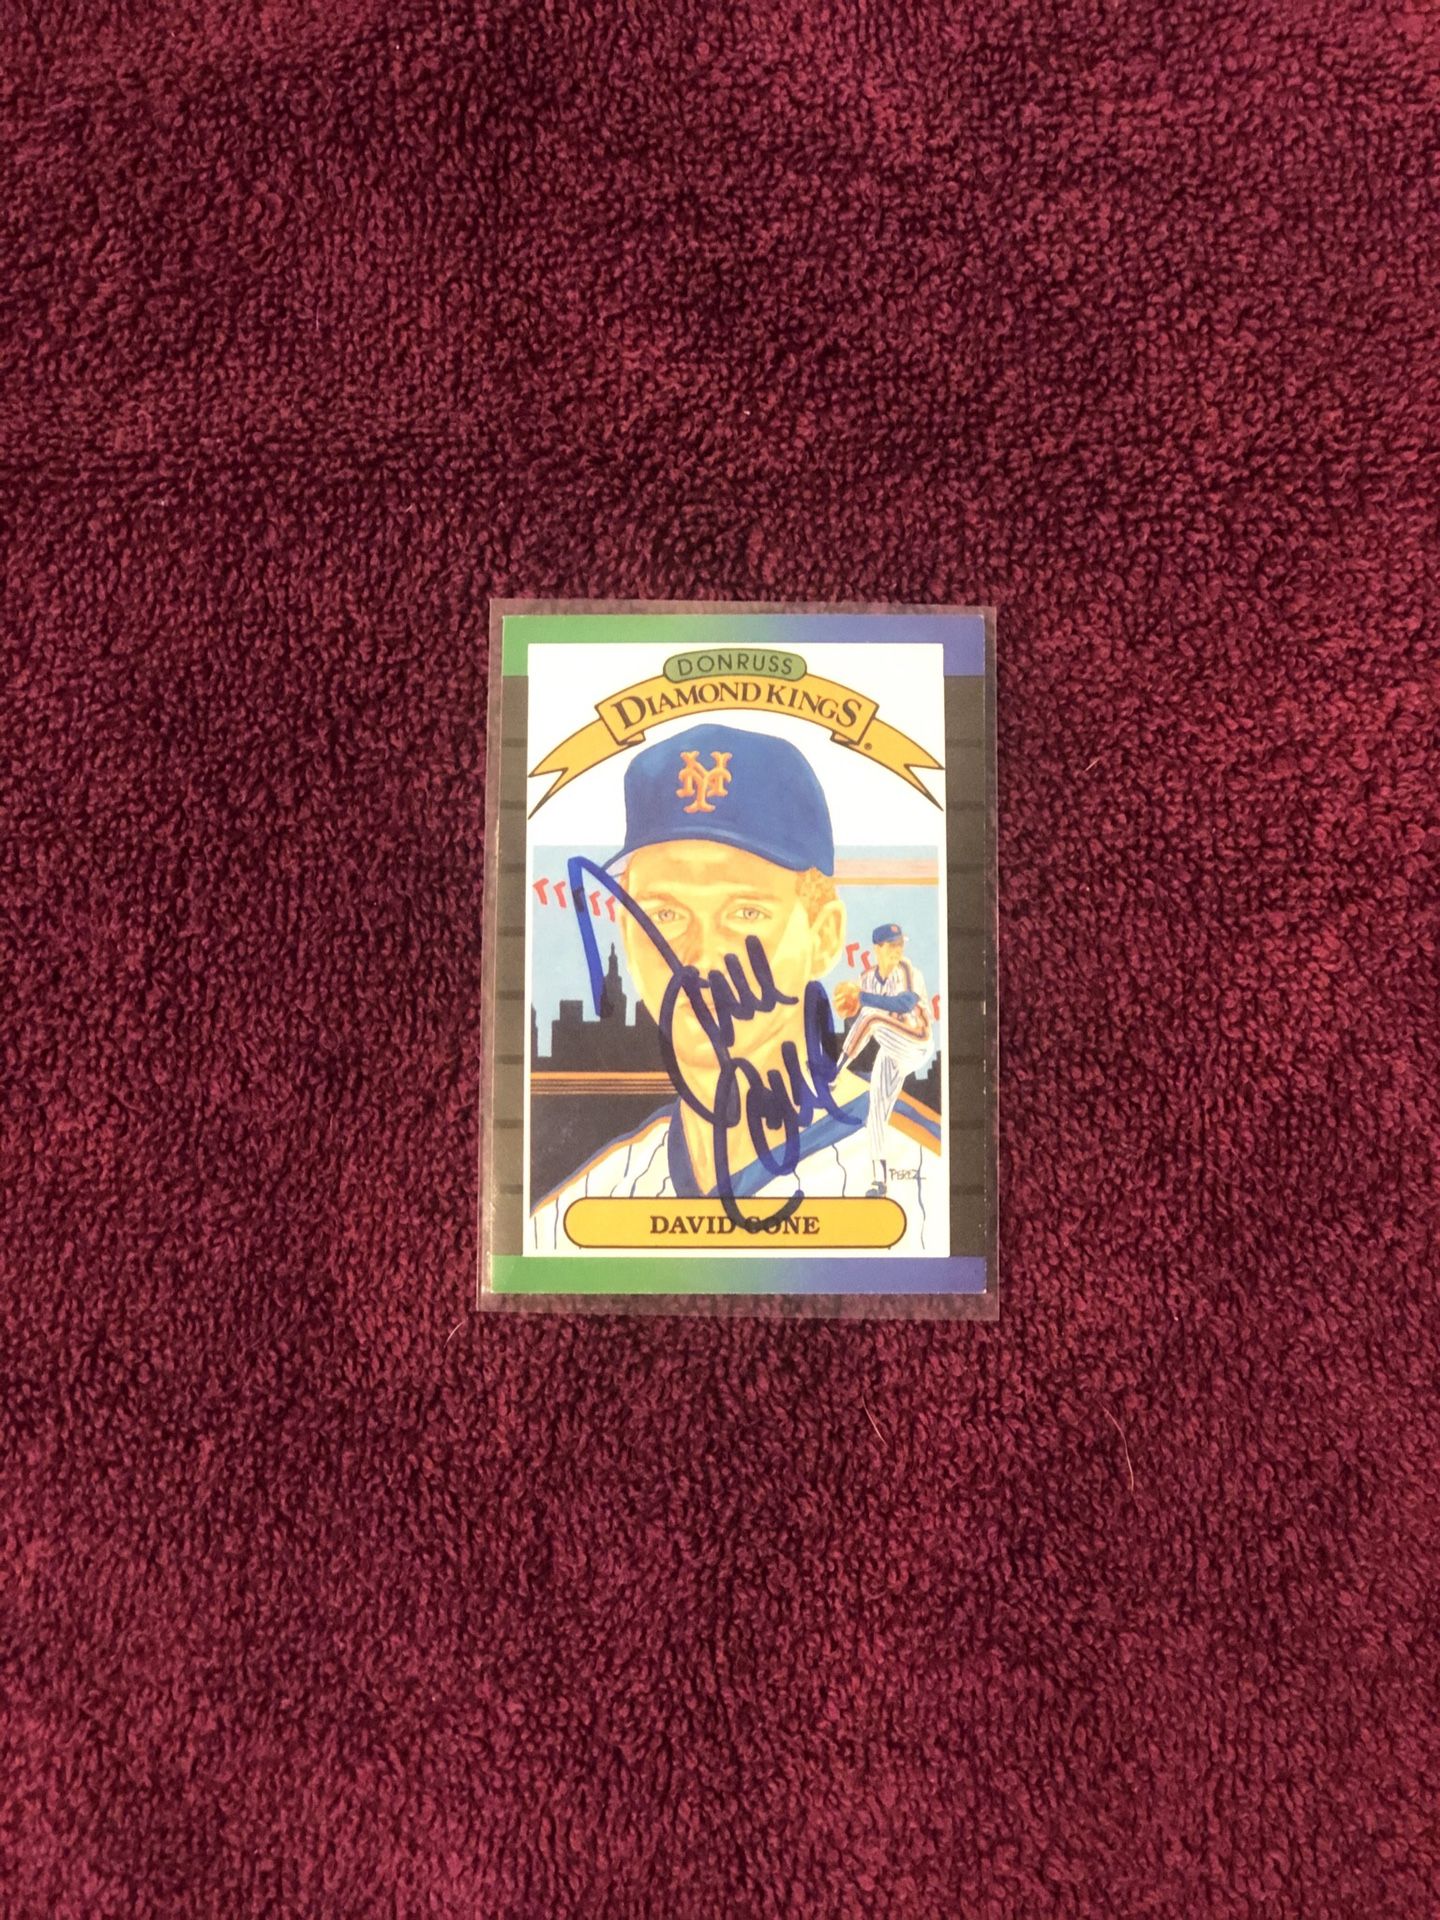 Dave David Cone Hand Signed Autograph Was Morning Diamond King’s NY Mets Baseball Card Genuine